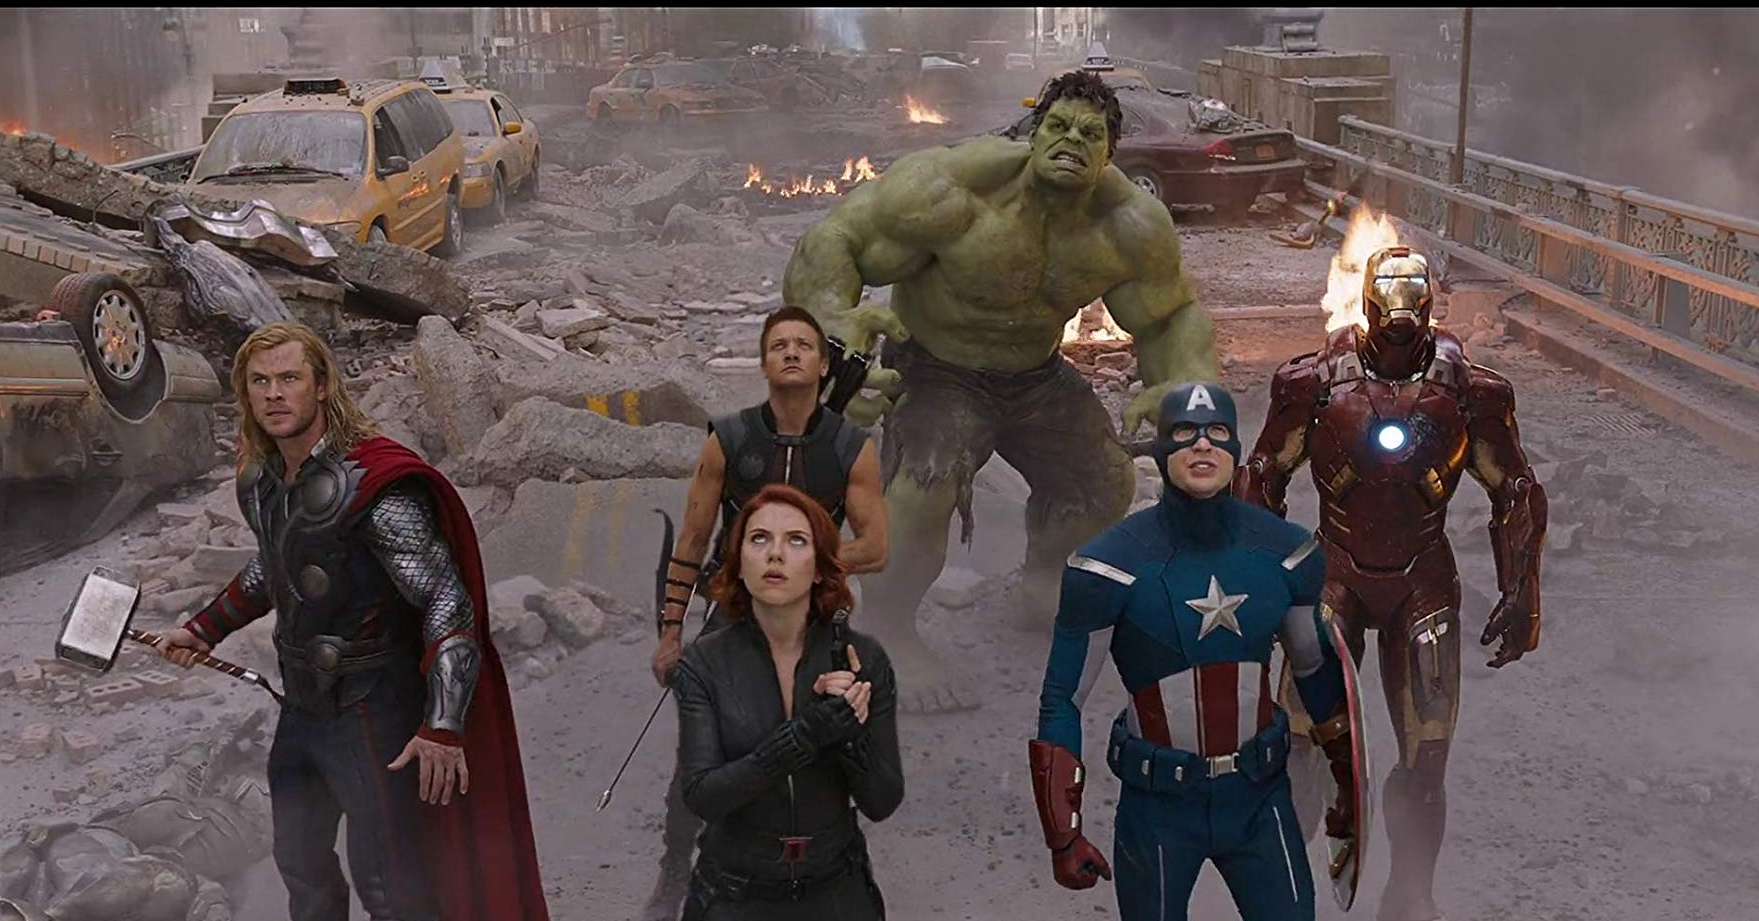 The Avengers look to the skies as they fight the Chitauri.